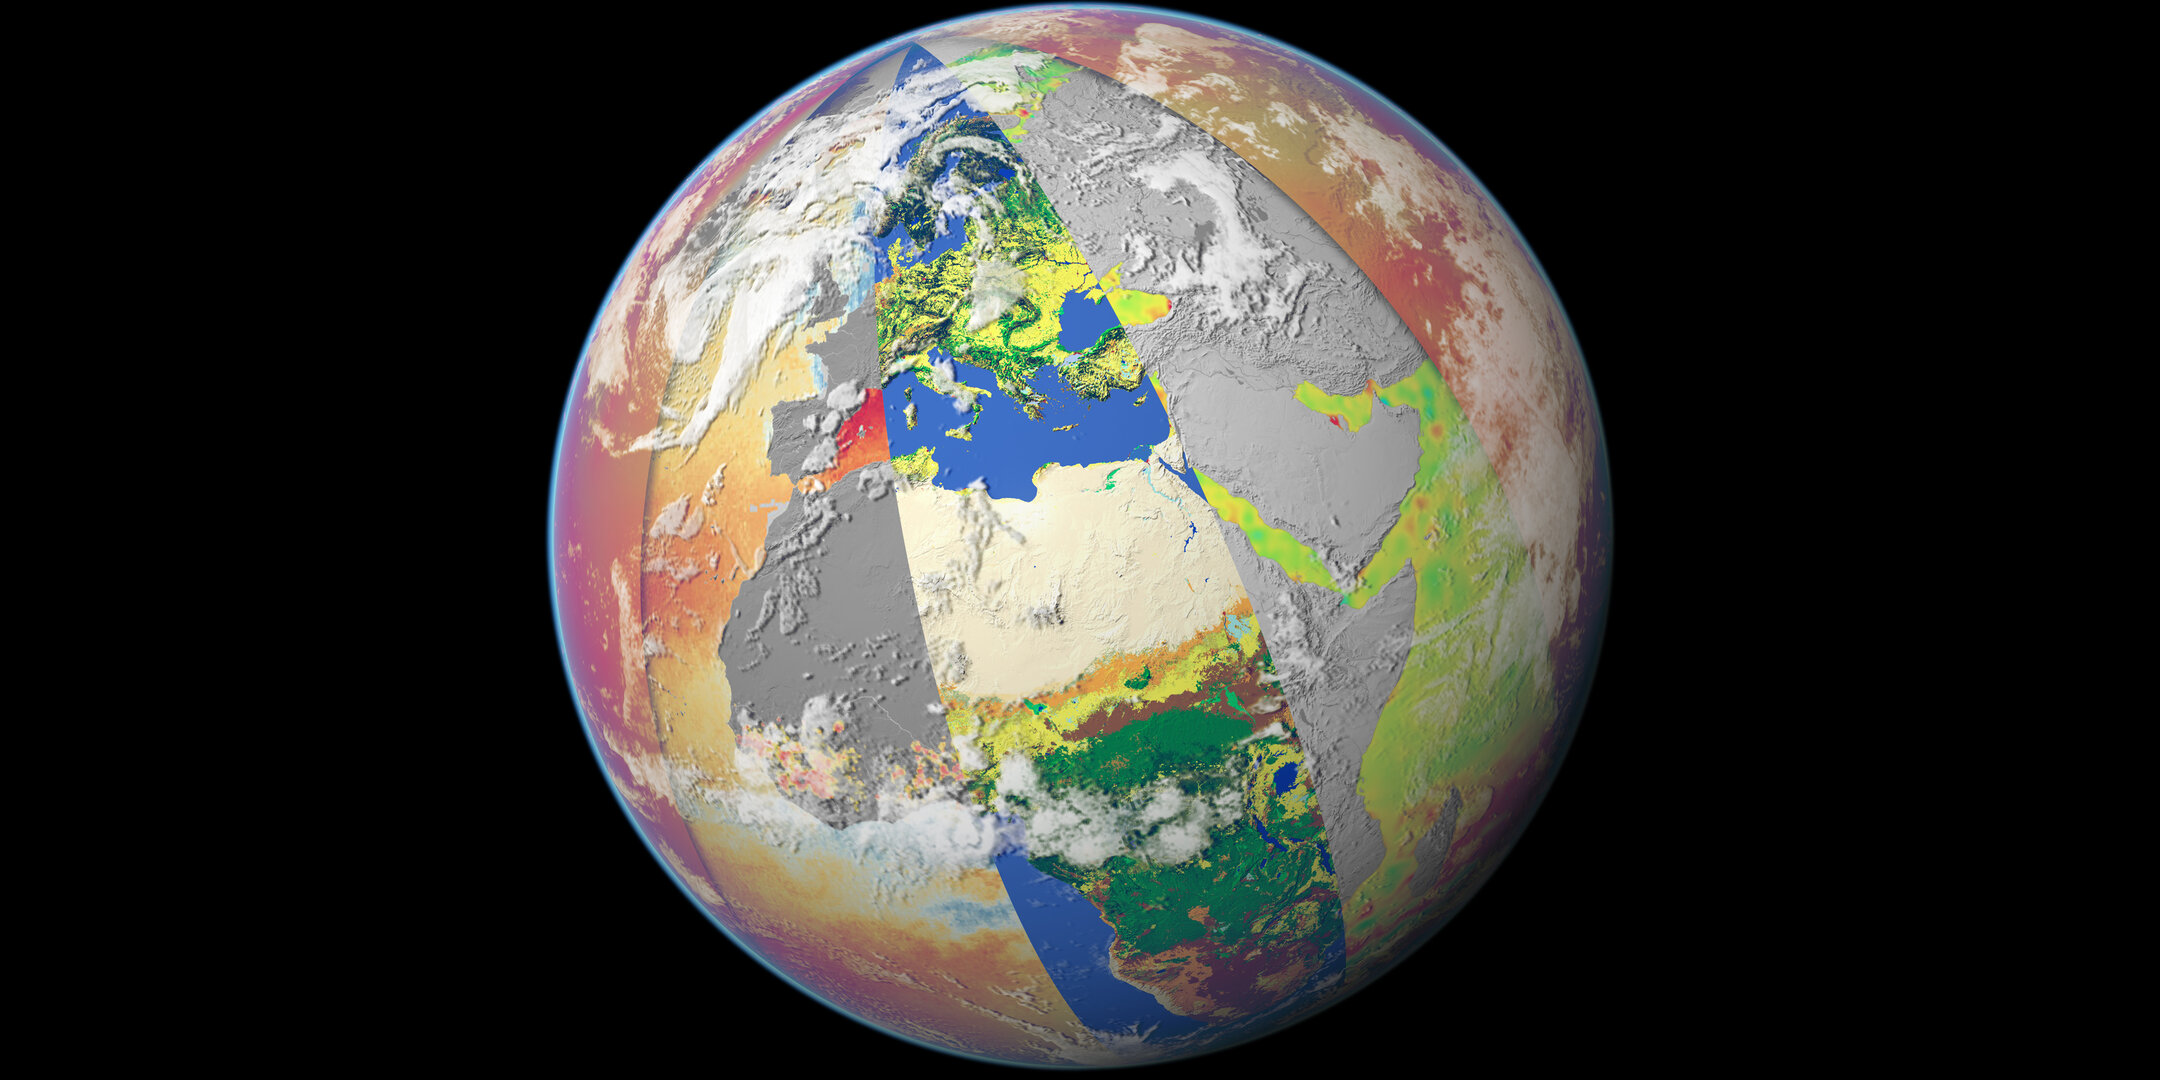 Earth observation supports climate action